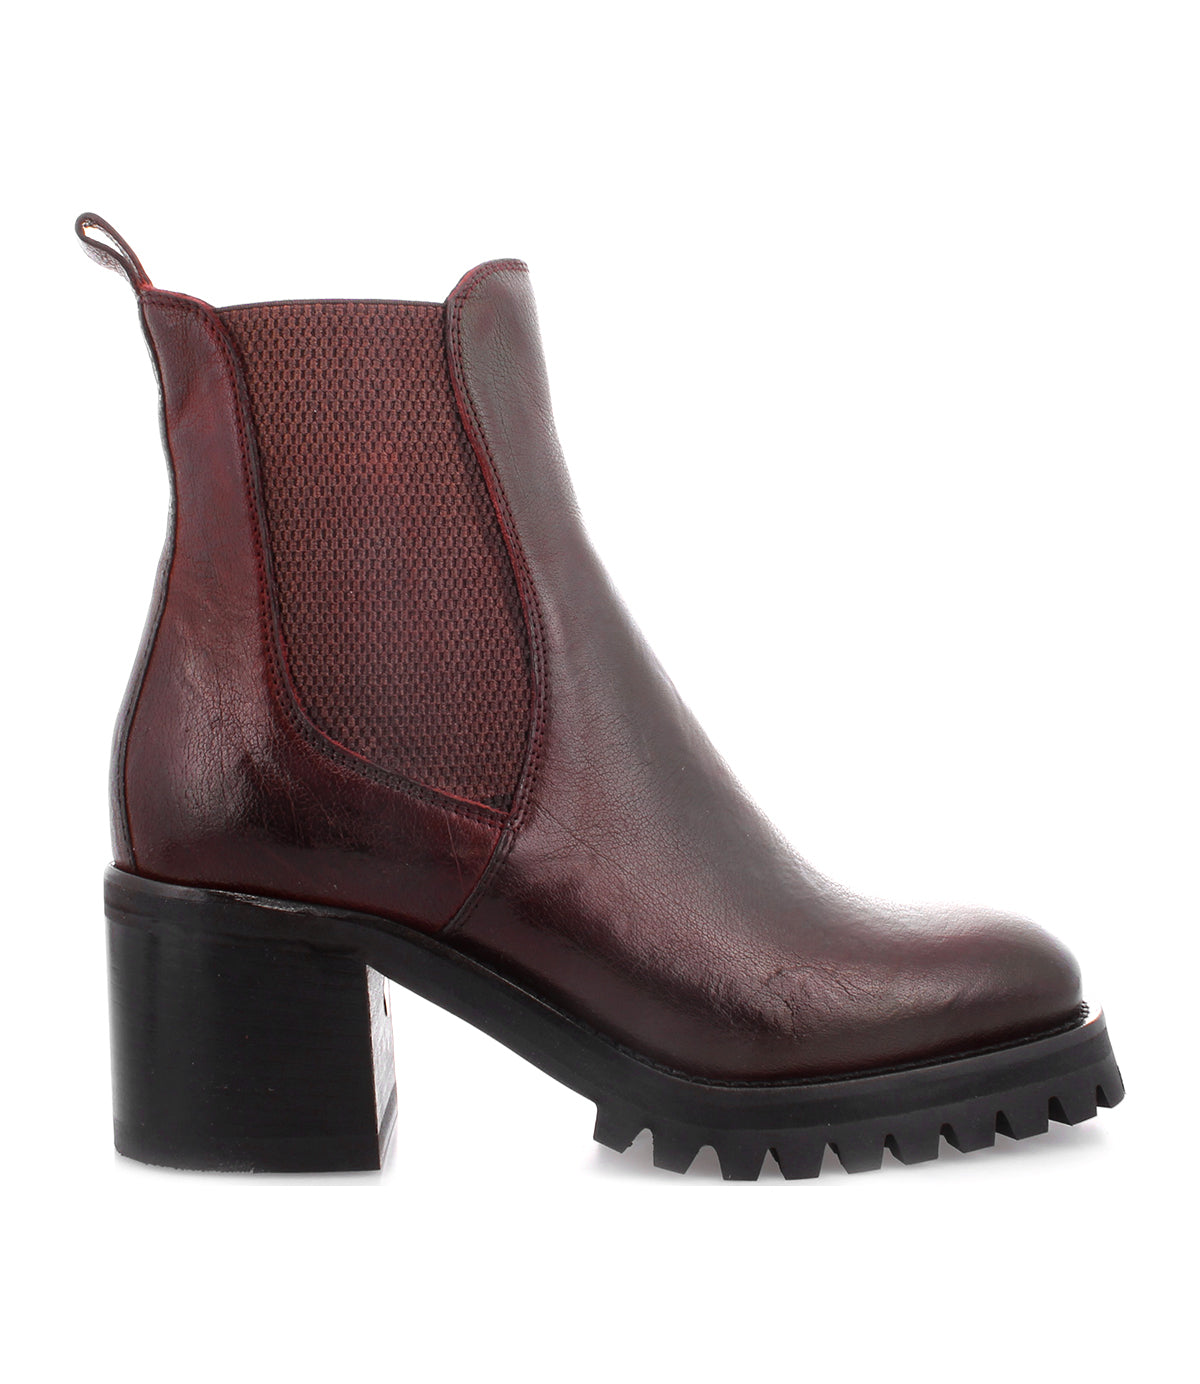 A women's Burgundy Surge ankle boot with a higher heel by Bed Stu.